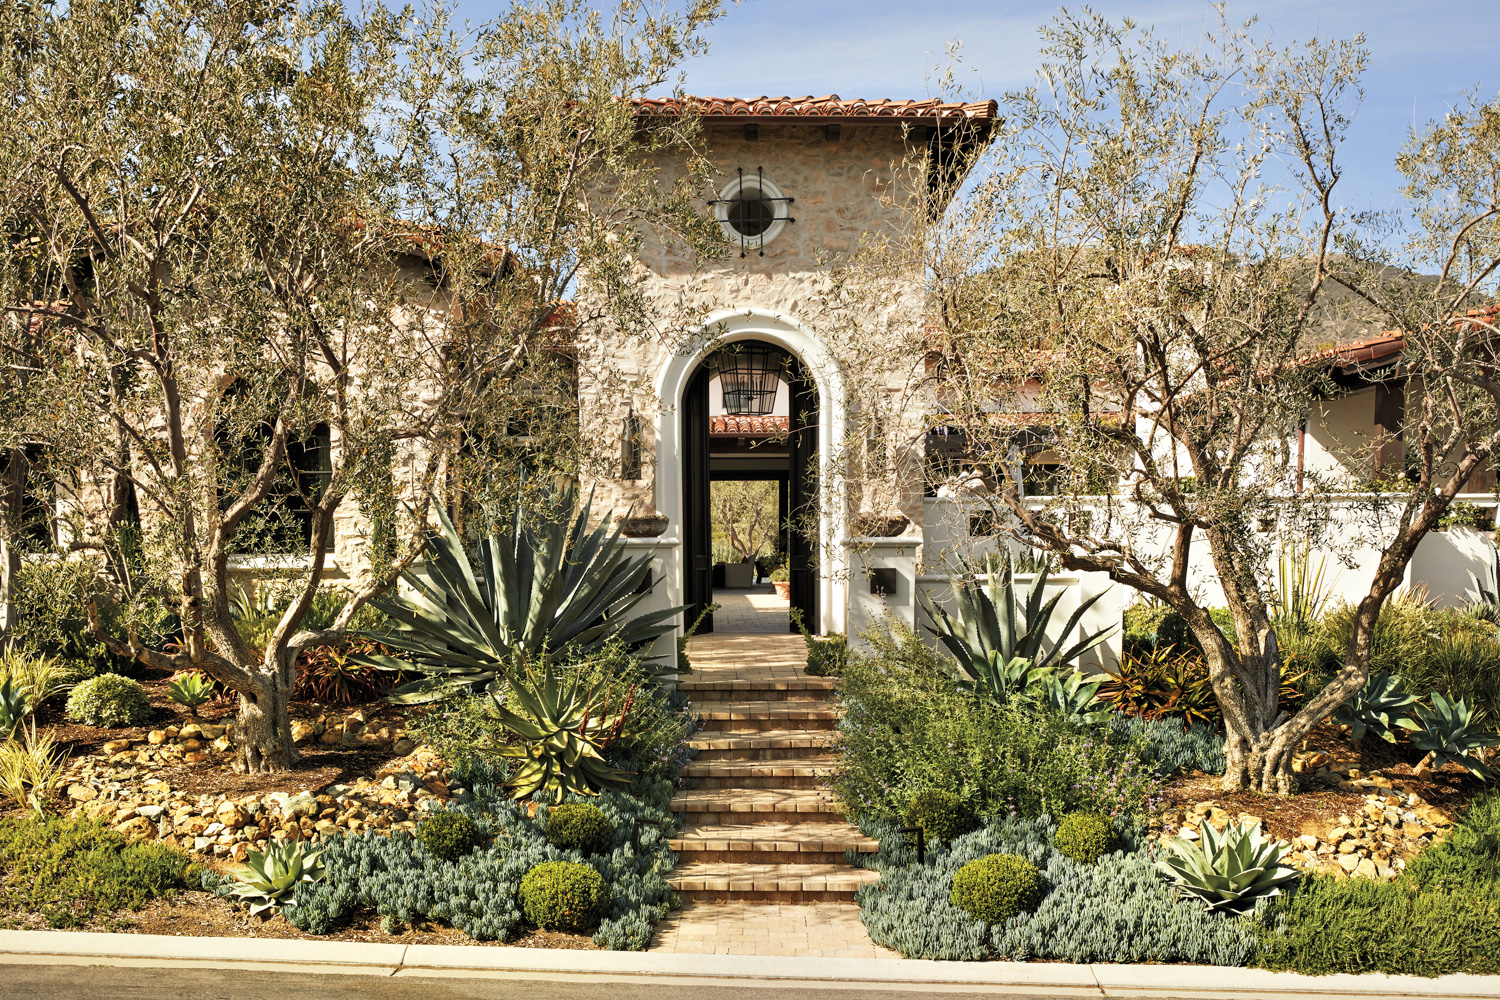 entryway path ro Mediterranean-style home with overgrout stone exterior